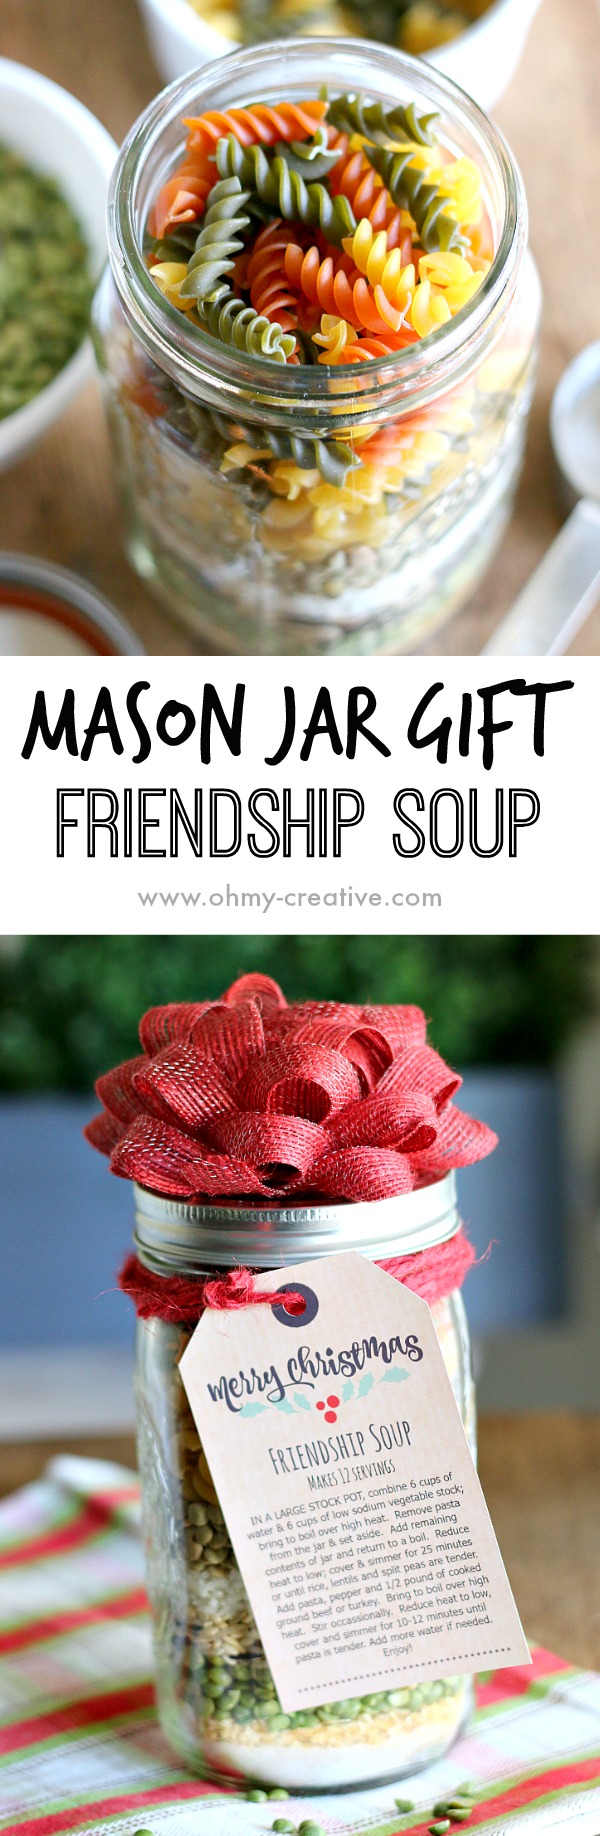 Edible gifts create the perfect personal touch for gift giving during the holiday season. This Soup in a Jar Gift makes a great gift for friends, neighbors and co-workers! Its so easy to make soup in a jar recipes - a real time saver at the holidays. This mason jar recipe makes a tasty Christmas soup! | OHMY-CREATIVE.COM